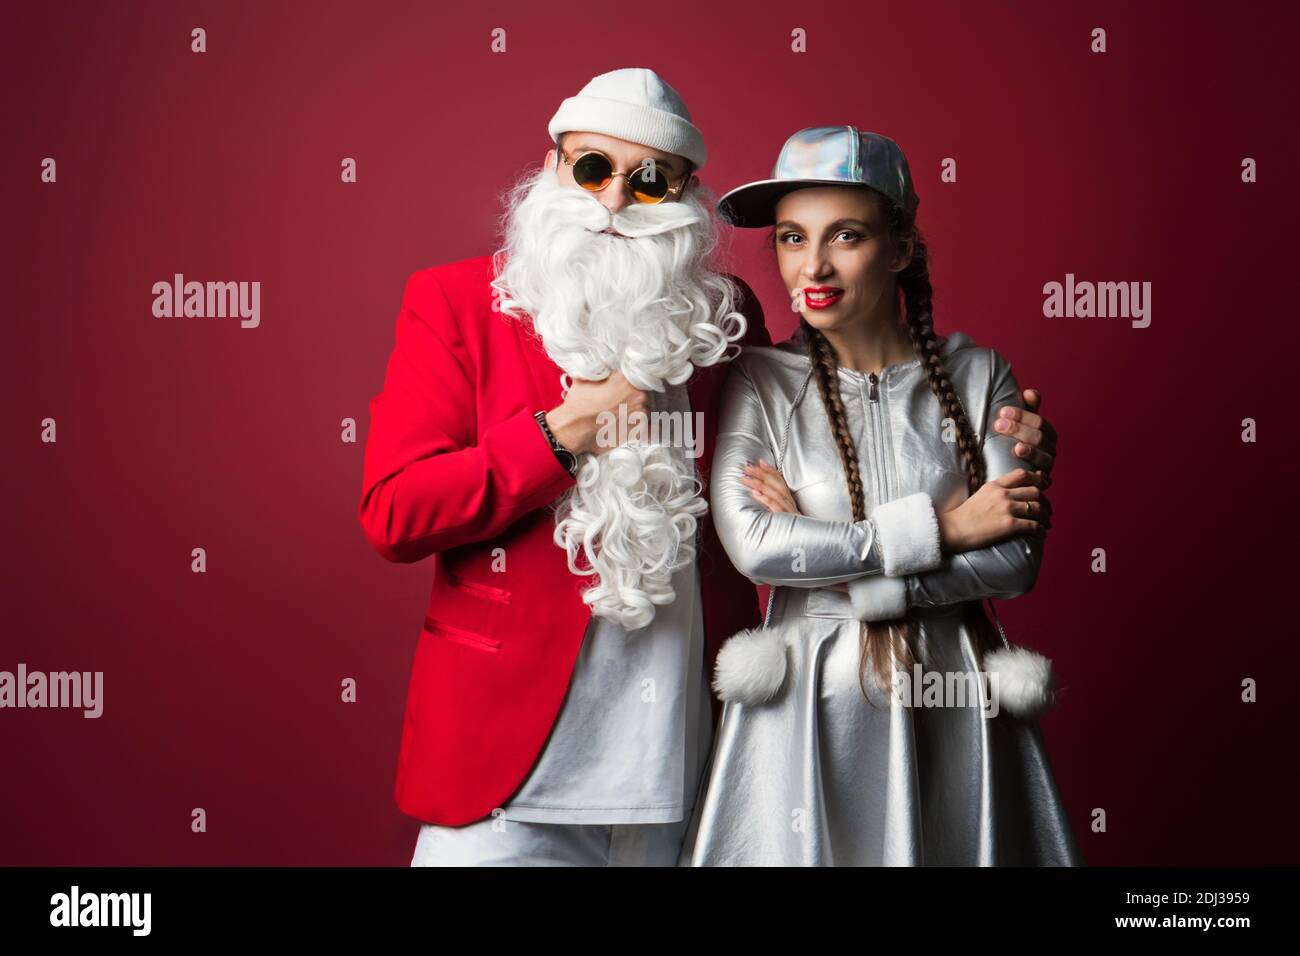 Dj Santa Claus with Sunglasses and Headphones Listening to Christmas Music  and Snow Maiden Having Fun. Hip Hop Xmas Party Time Stock Photo - Alamy